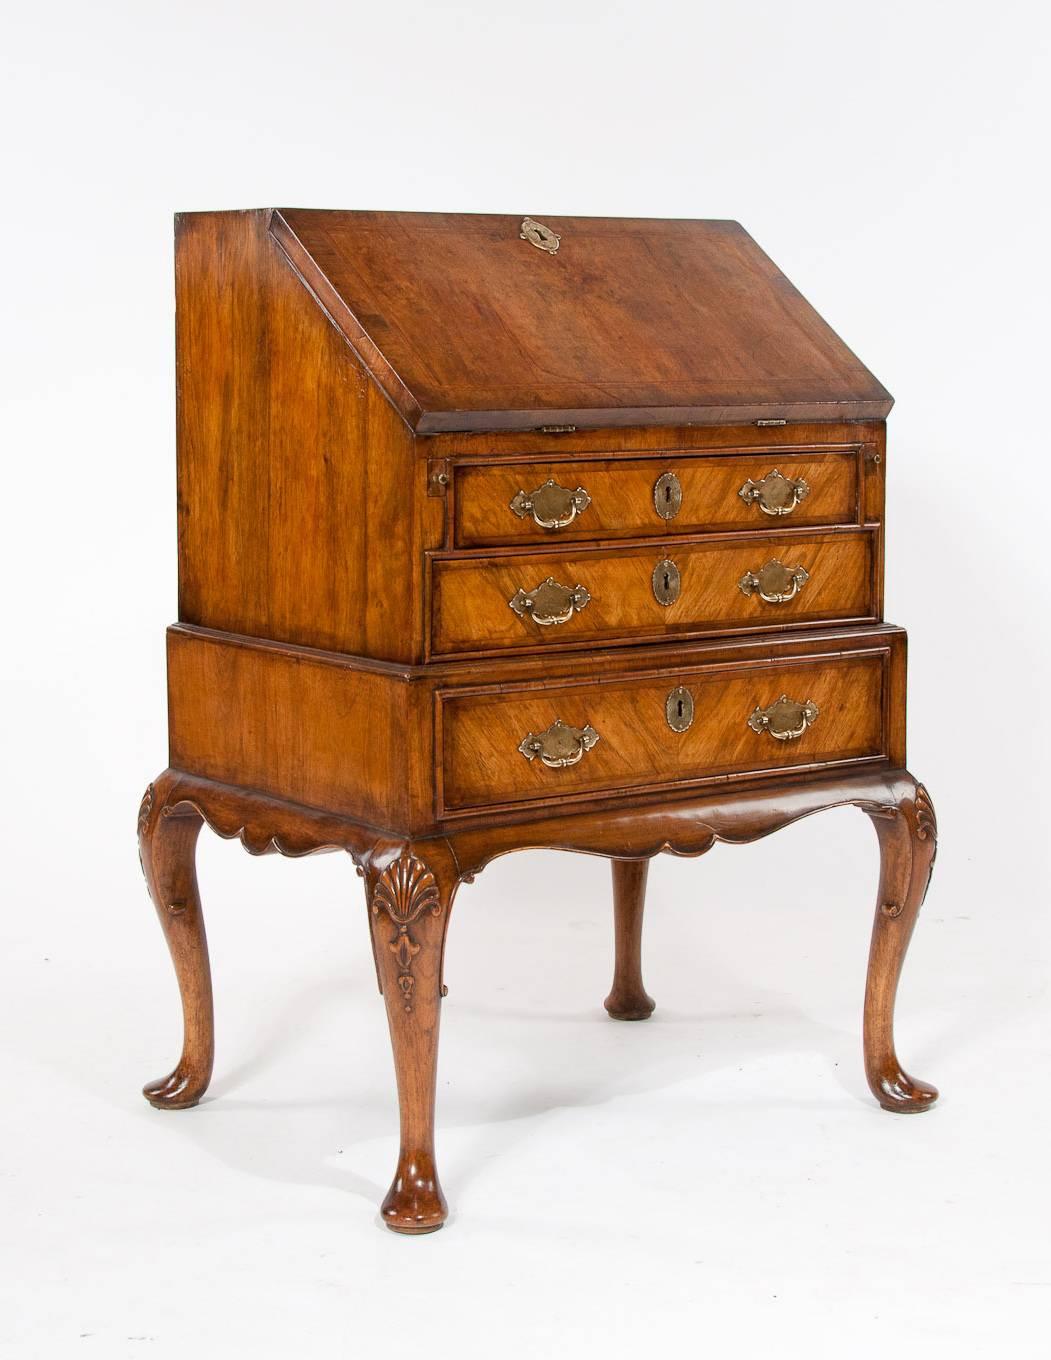 A very good quality walnut bureau on stand raised on cabriole legs with shell on the knee.
Dating to circa 1880-1900 this walnut bureau has been constructed in the same manner as a Queen Anne bureau and the attention to detail is excellent. It's